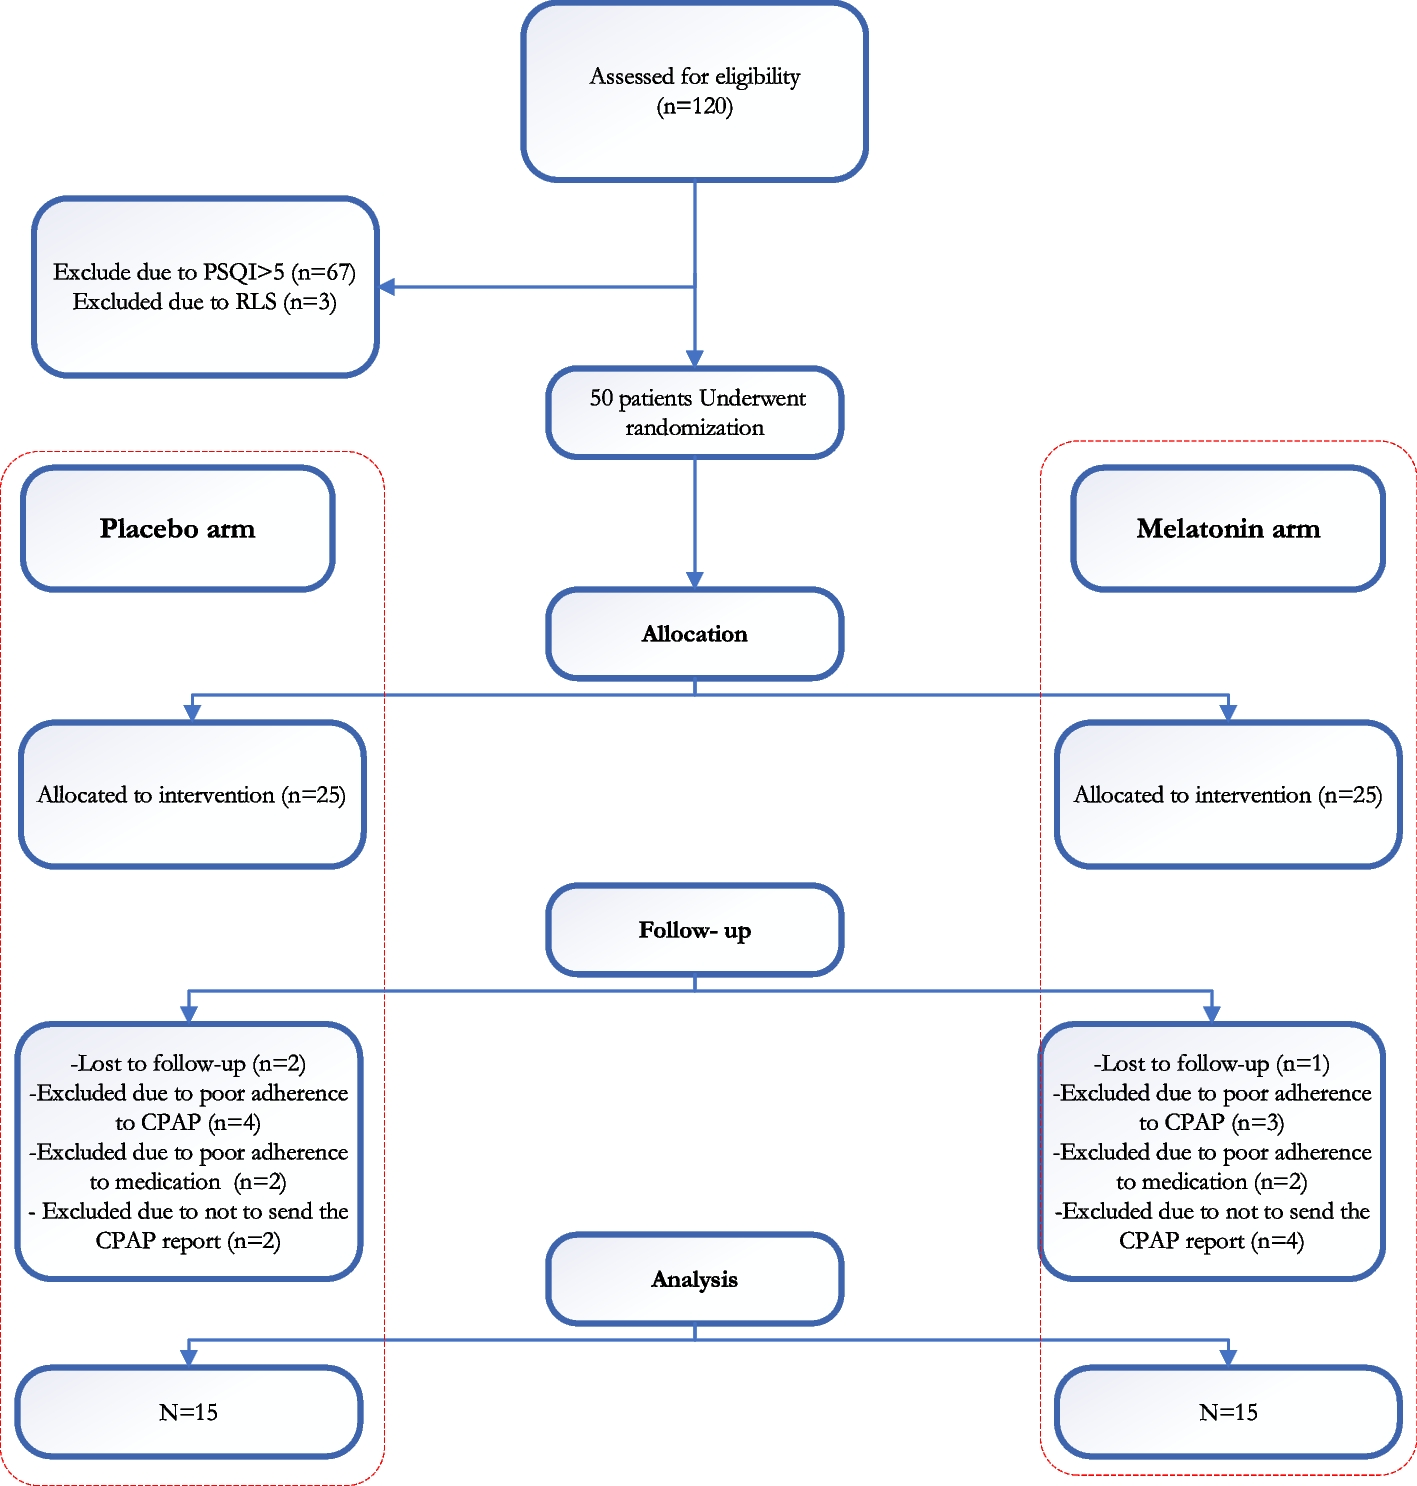 Effect of melatonin on insomnia and daytime sleepiness, in patients with obstructive sleep apnea and insomnia (COMISA): A randomized double-blinded placebo-controlled trial